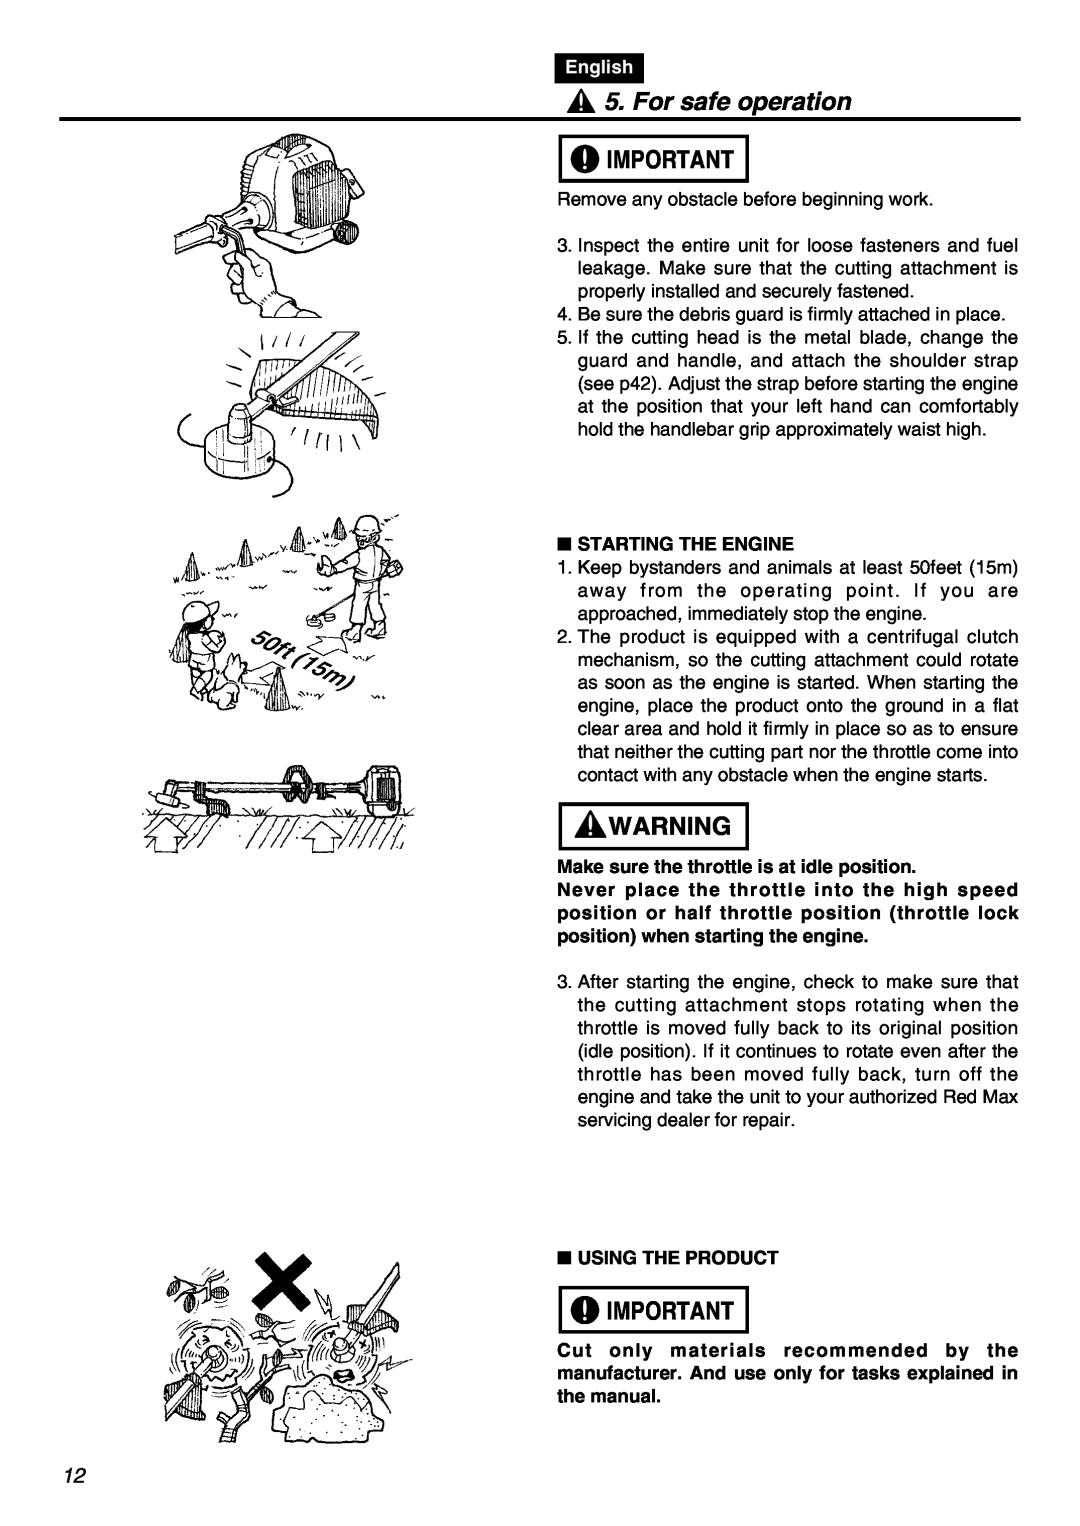 RedMax BCZ2401S-CA manual For safe operation, English, Starting The Engine, Make sure the throttle is at idle position 